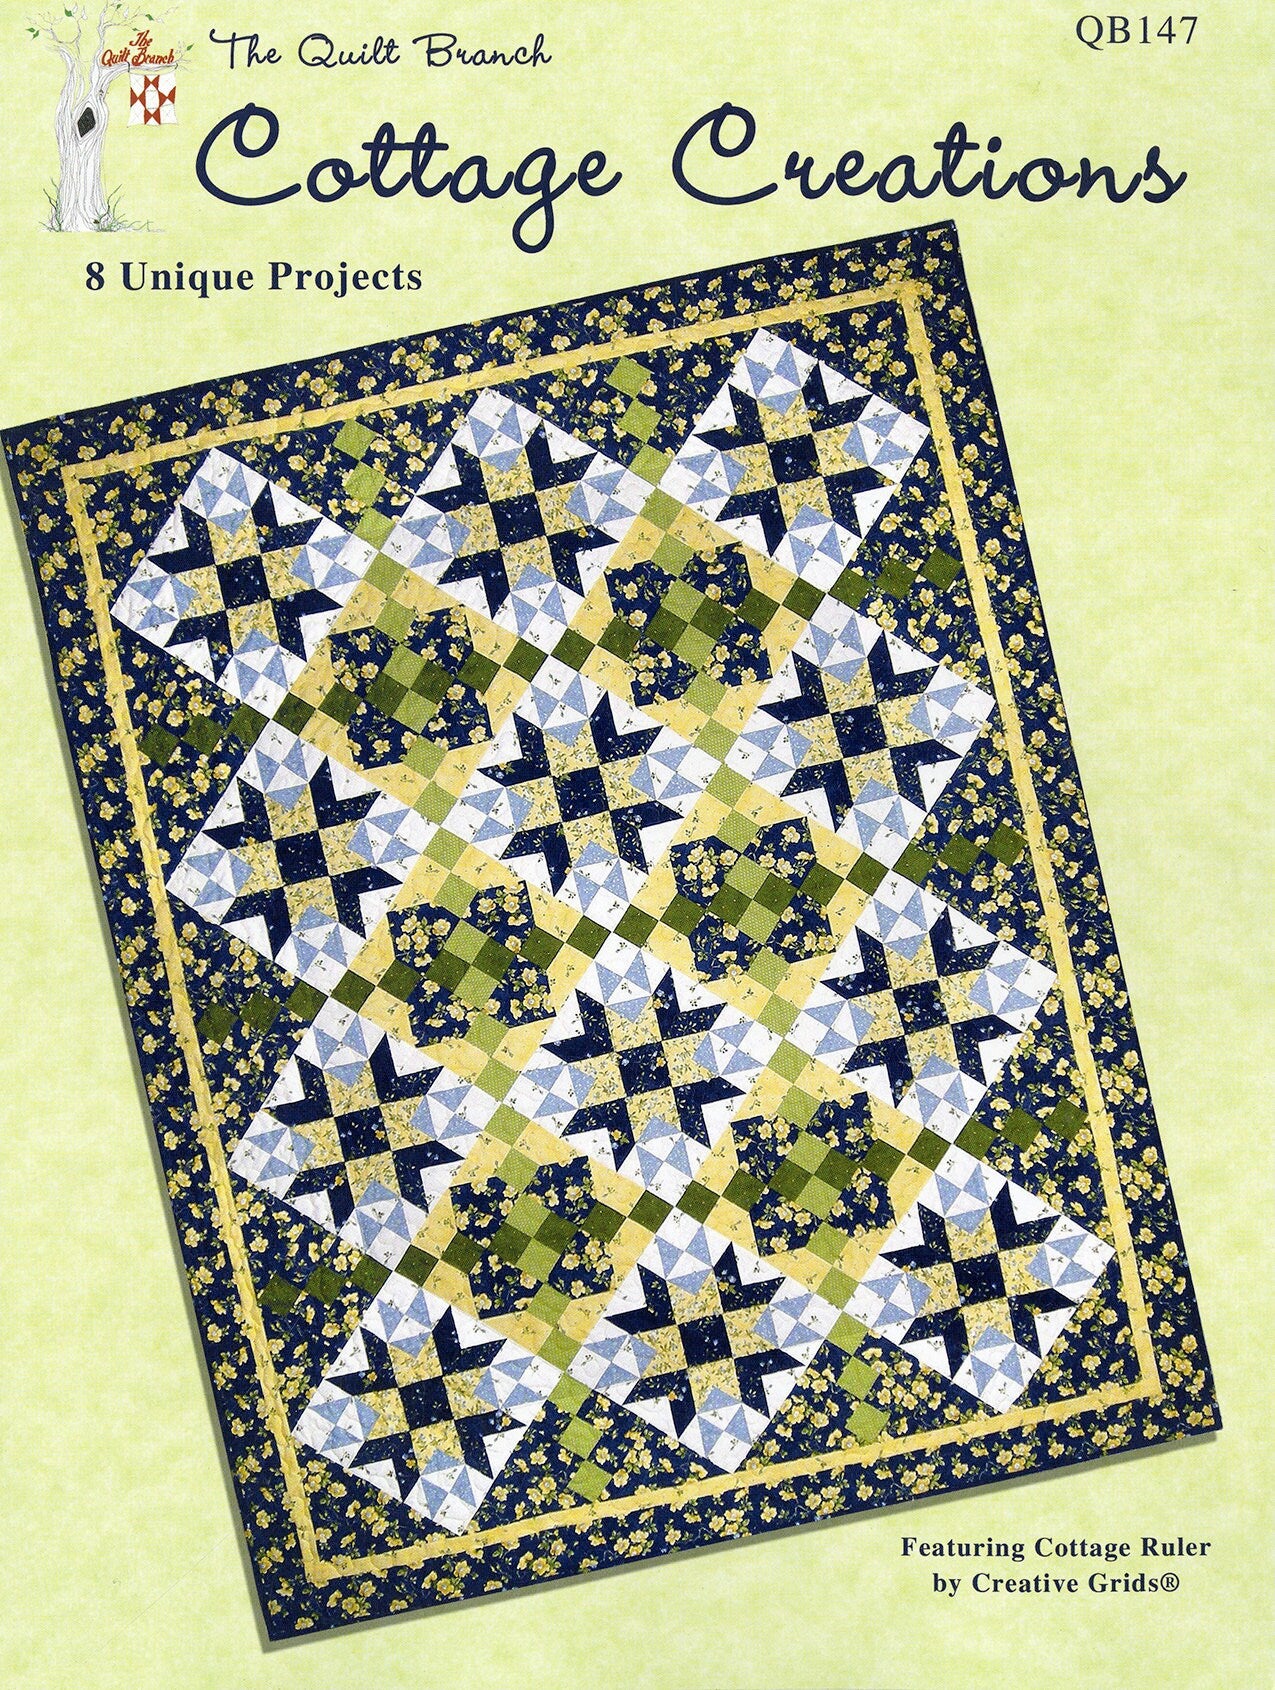 Cottage Creations Quilt Pattern Book by Susan Knapp of The Quilt Branch